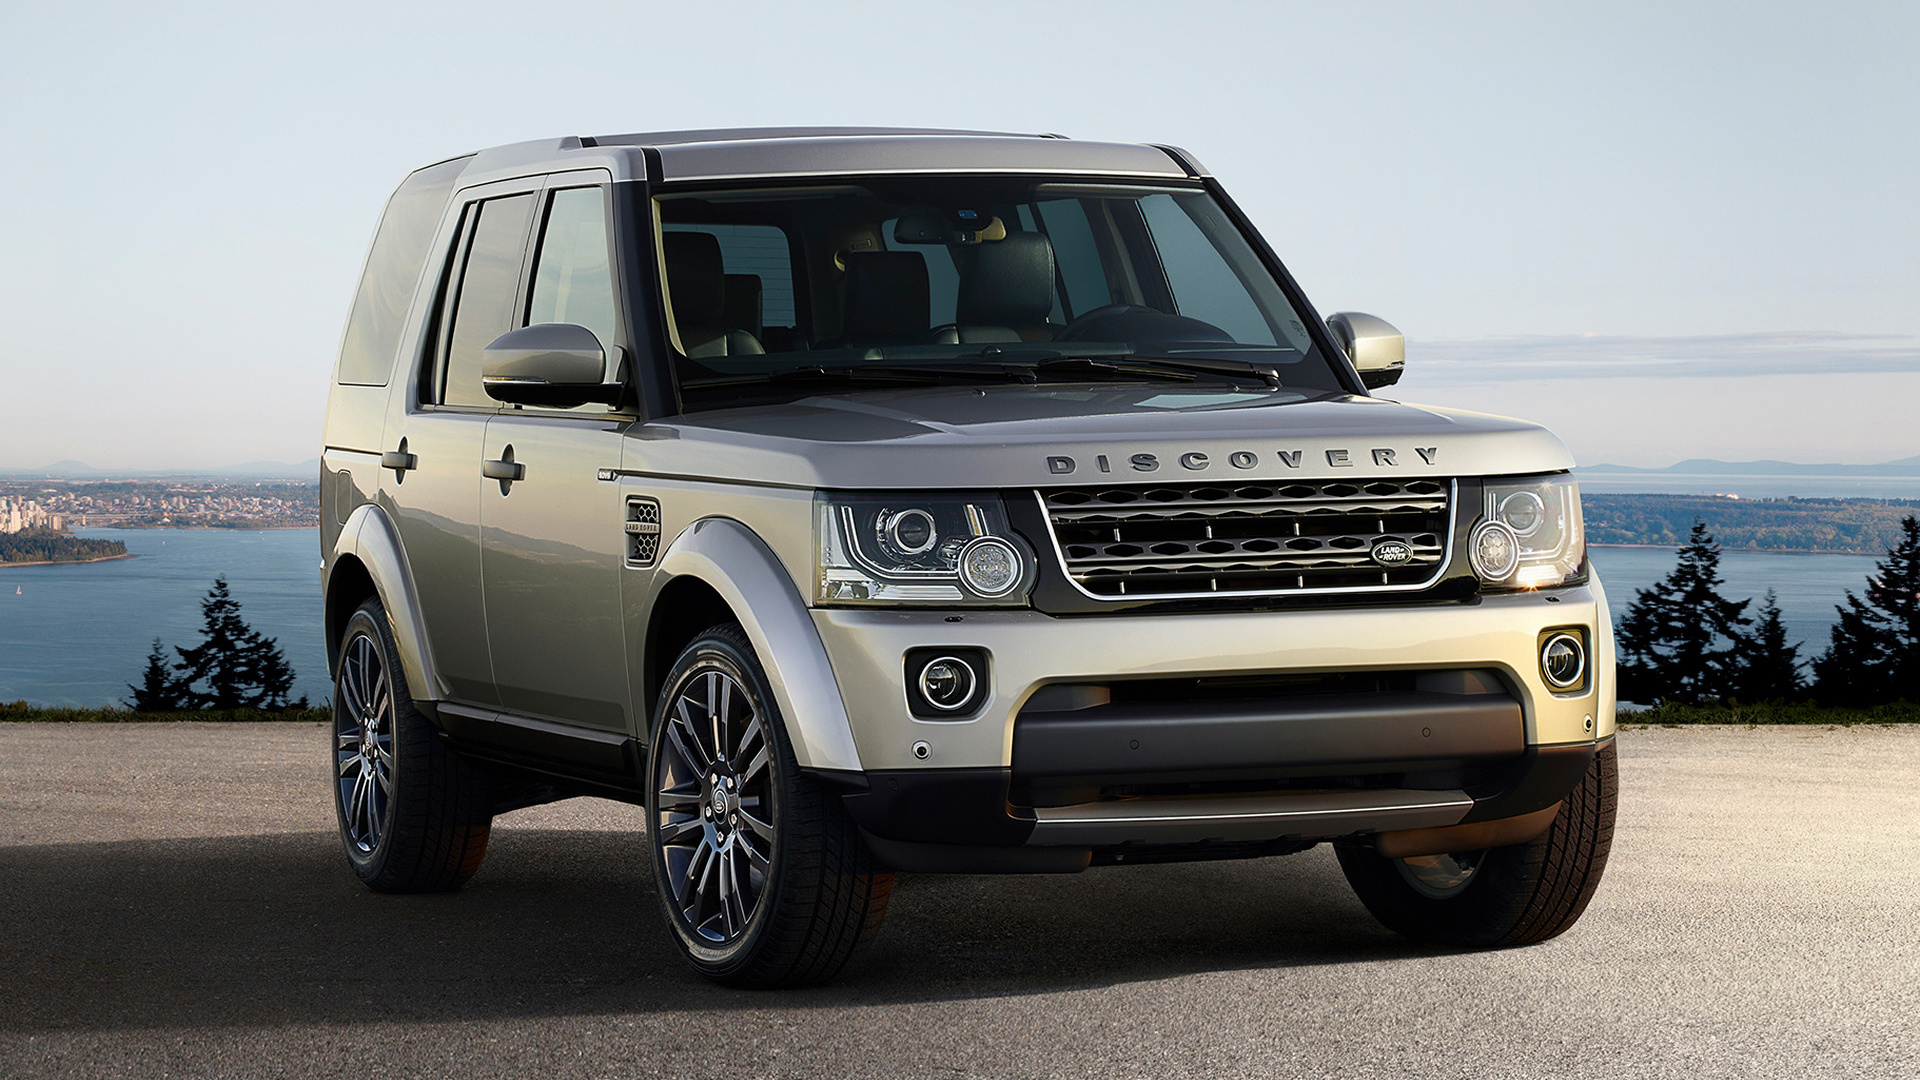 Land Rover Discovery Graphite Wallpaper And HD Image